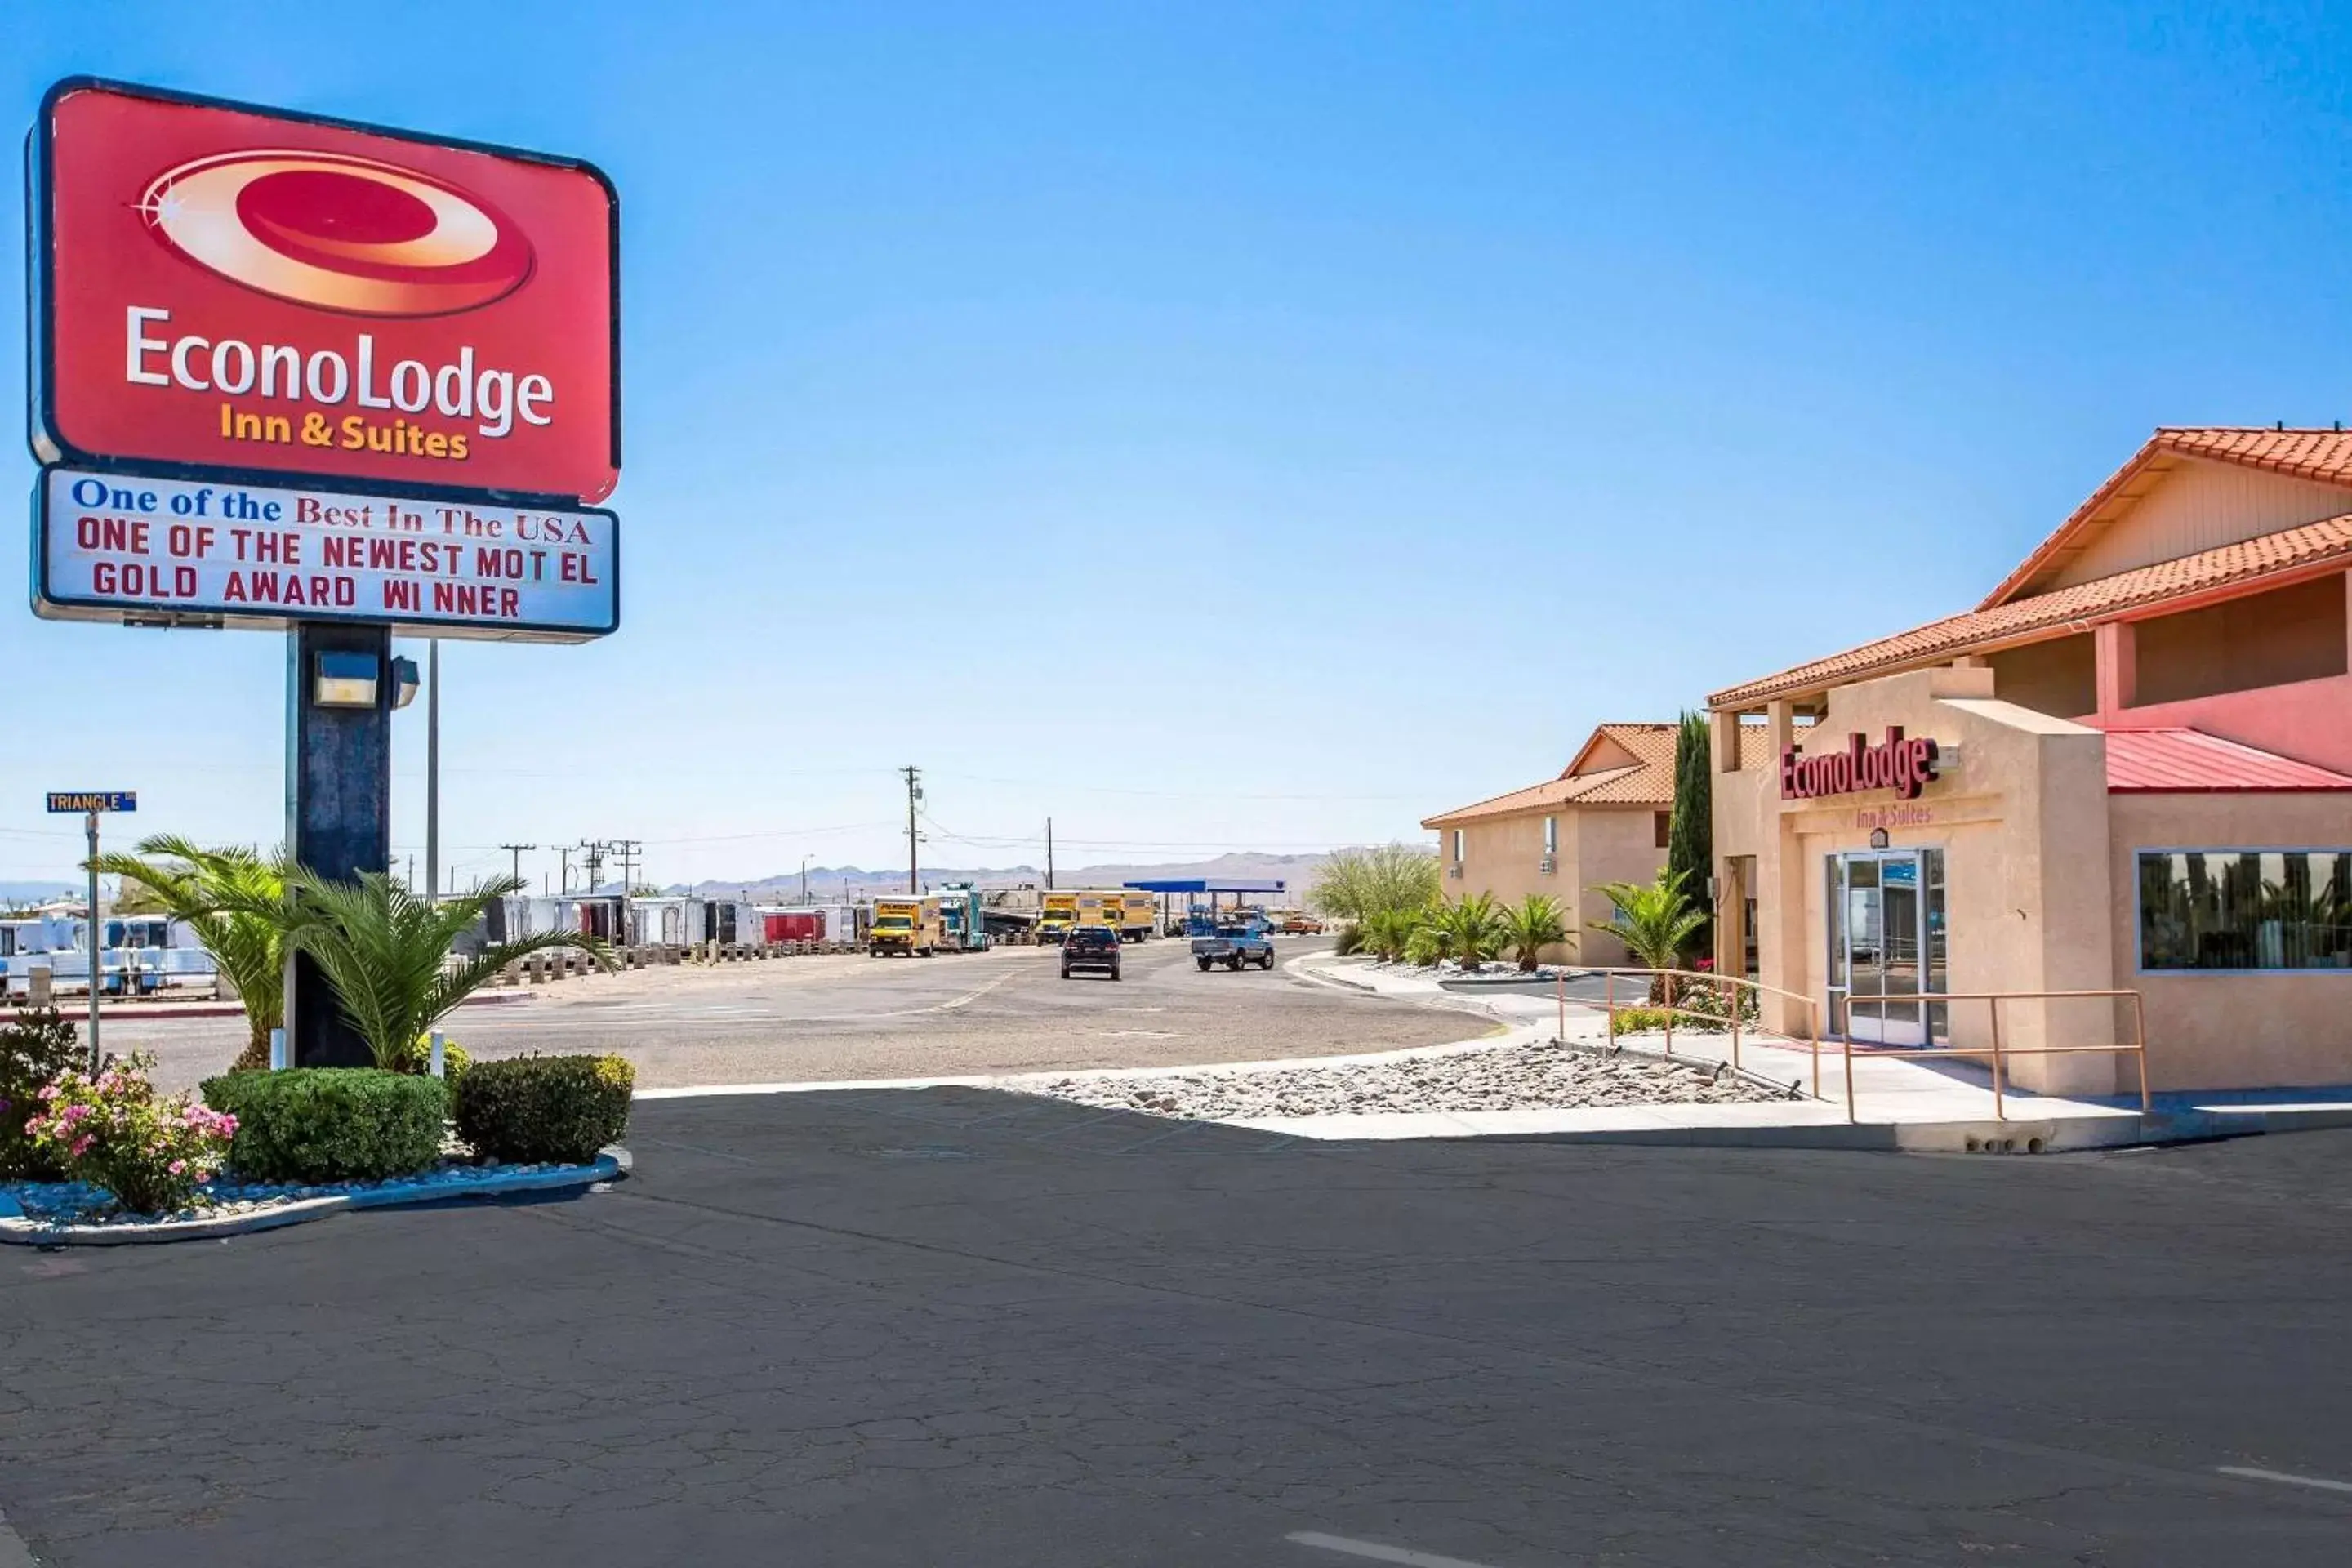 Property building in Econo Lodge Inn & Suites near China Lake Naval Station